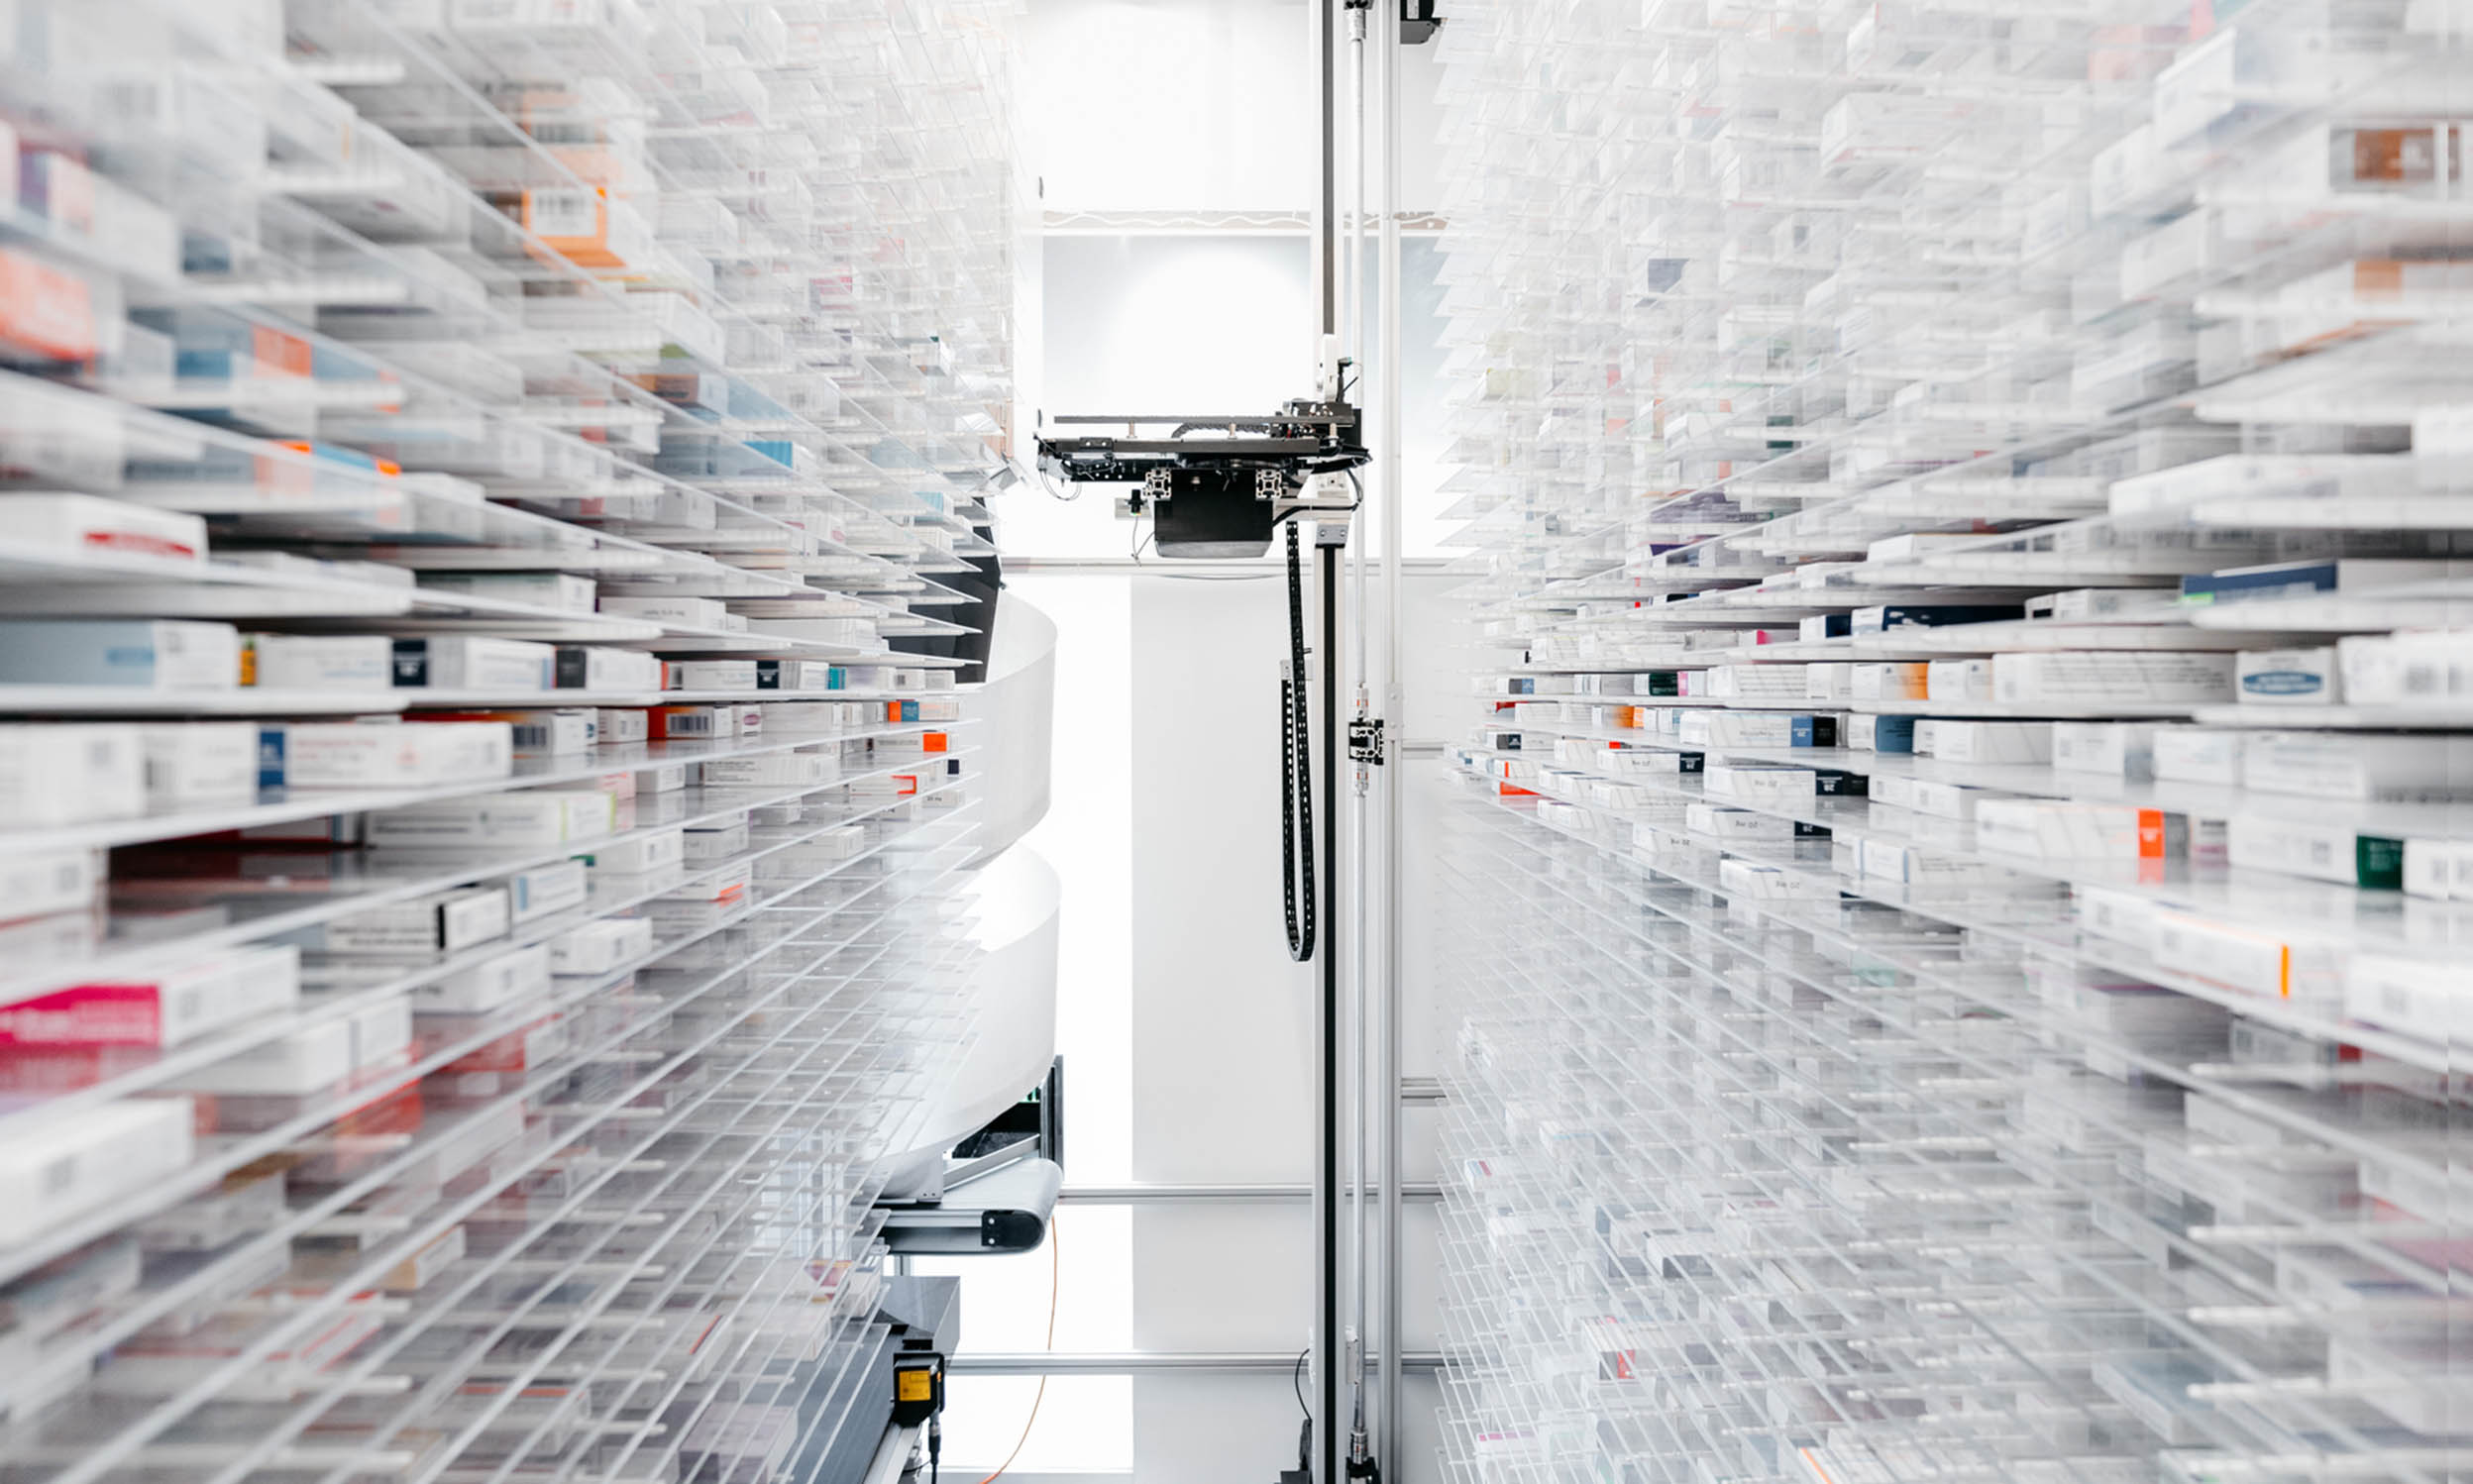 A robot at work in a pharmacy illustrates one way the innovative companies that make up the holdings of Invesco QQQ ETF are shaping the future.